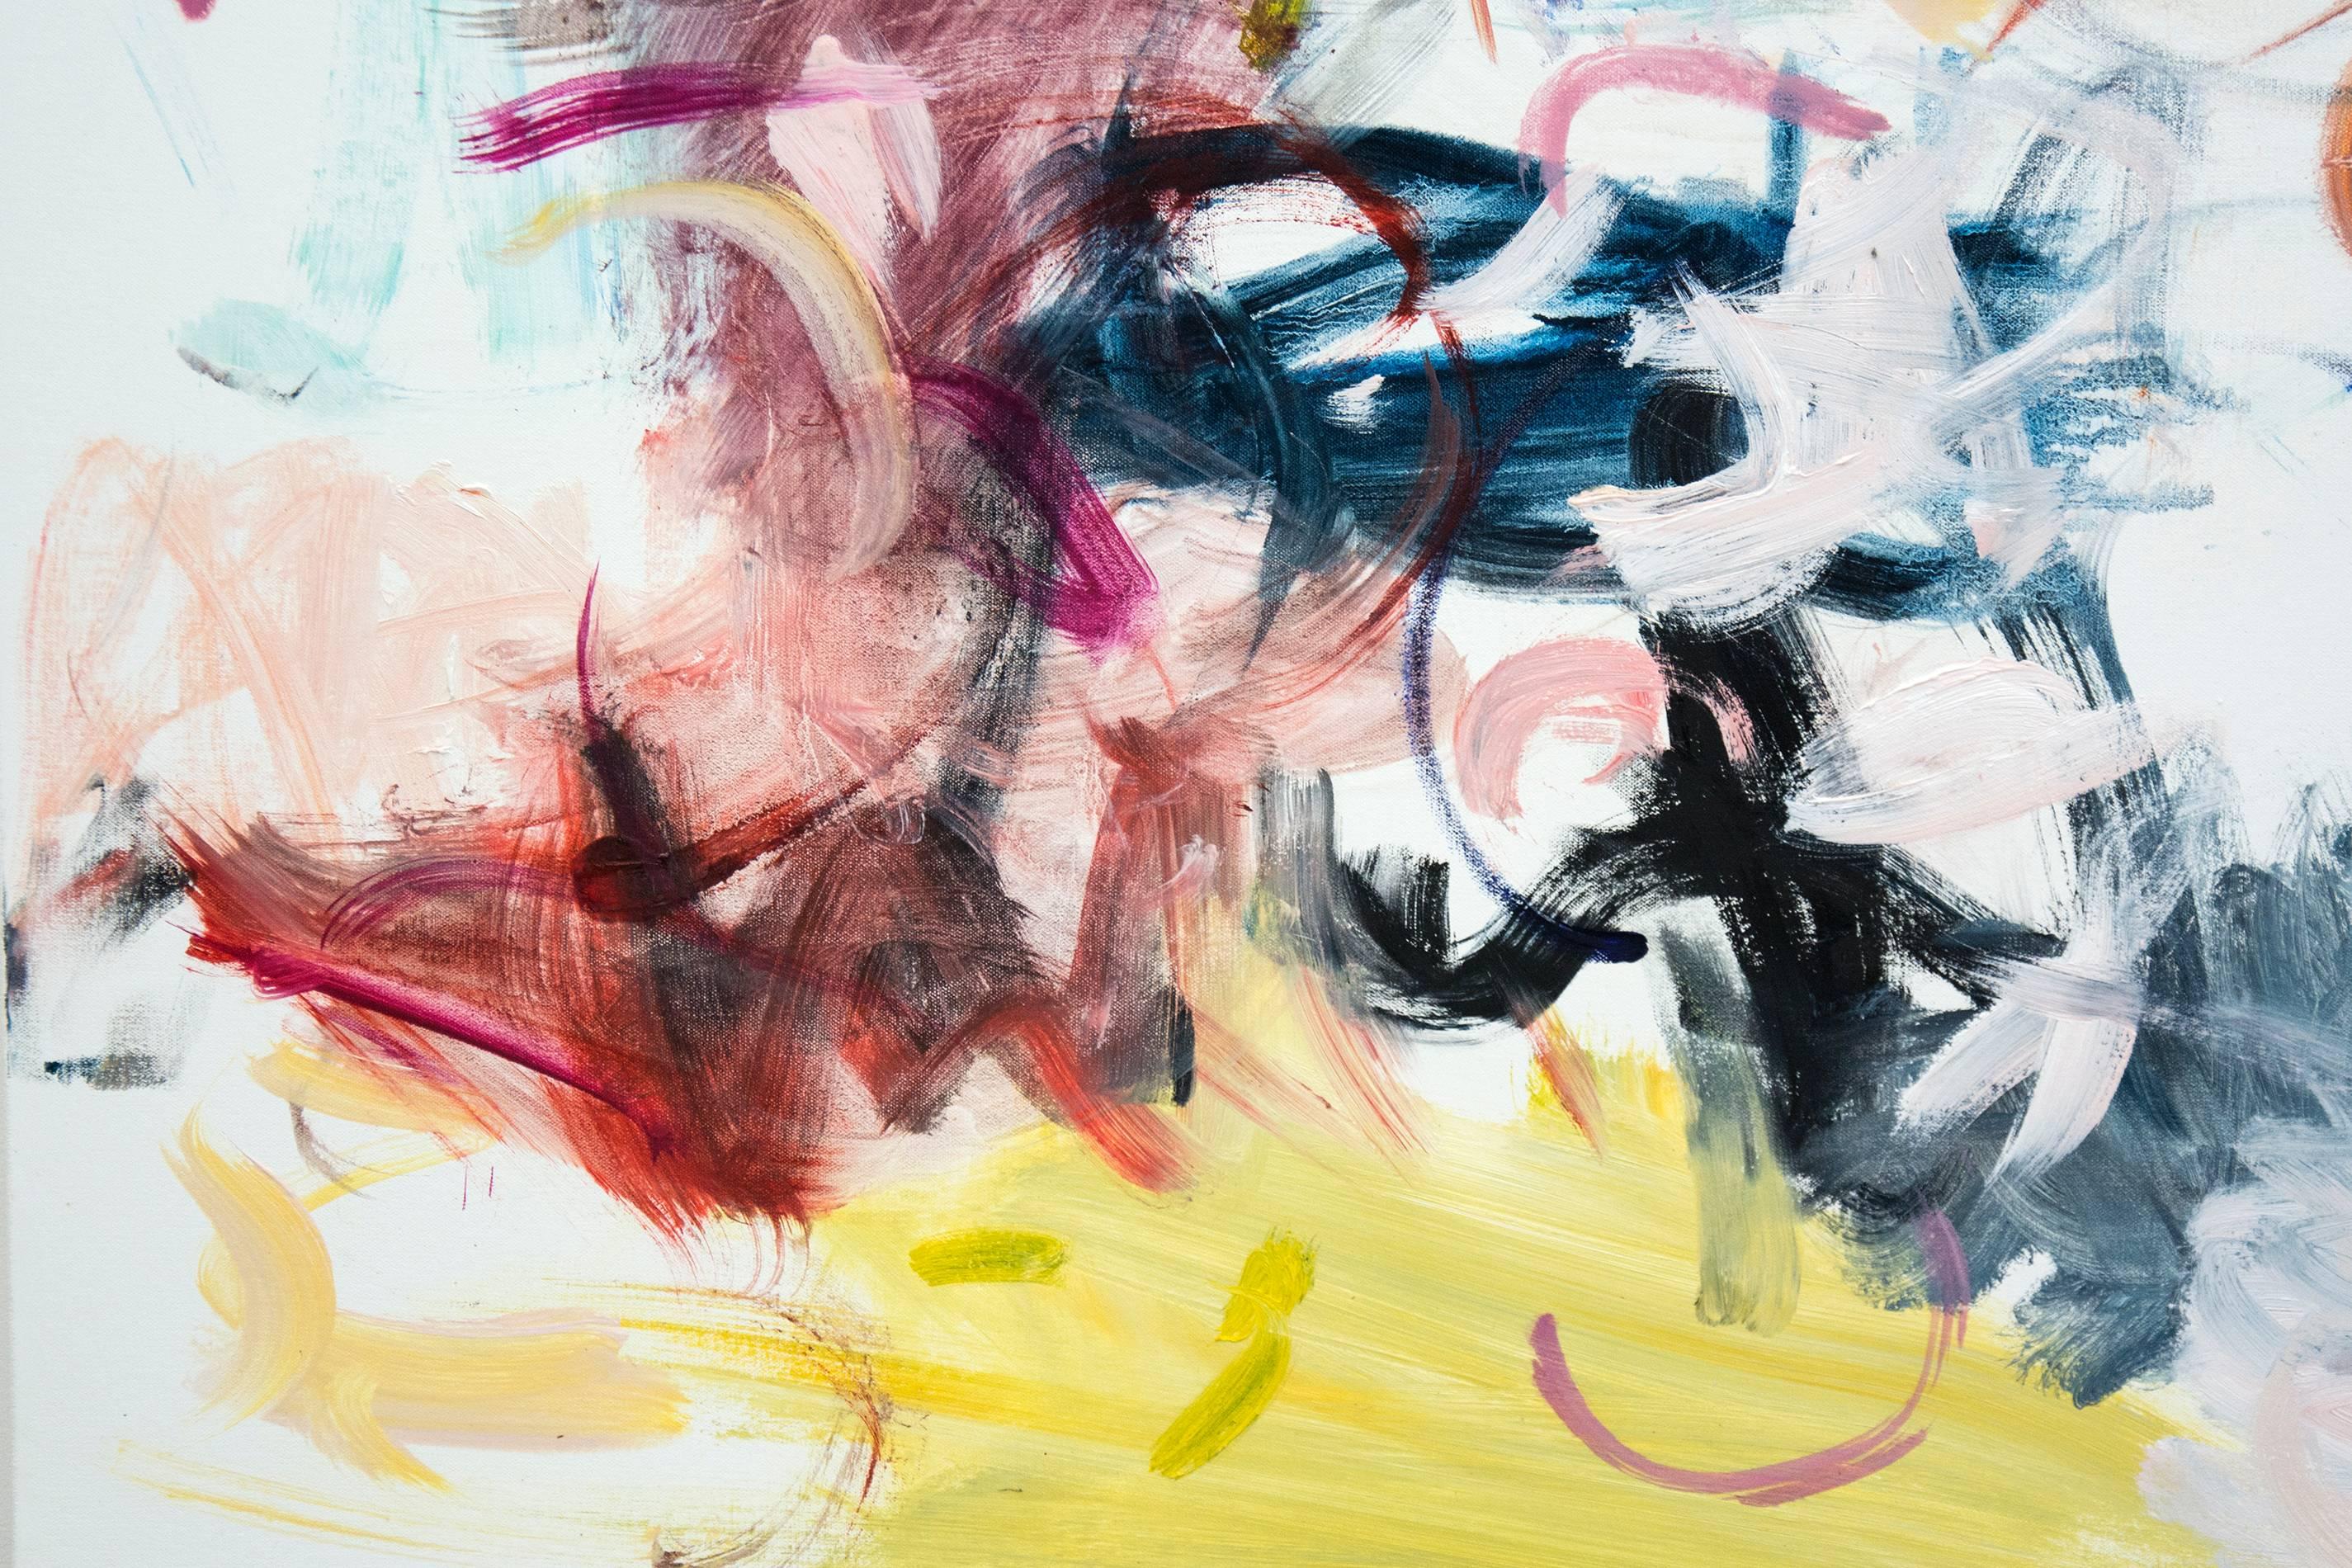 Kairoi No 33 - large, vibrant, colourful, gestural abstract, oil on canvas - Contemporary Painting by Scott Pattinson